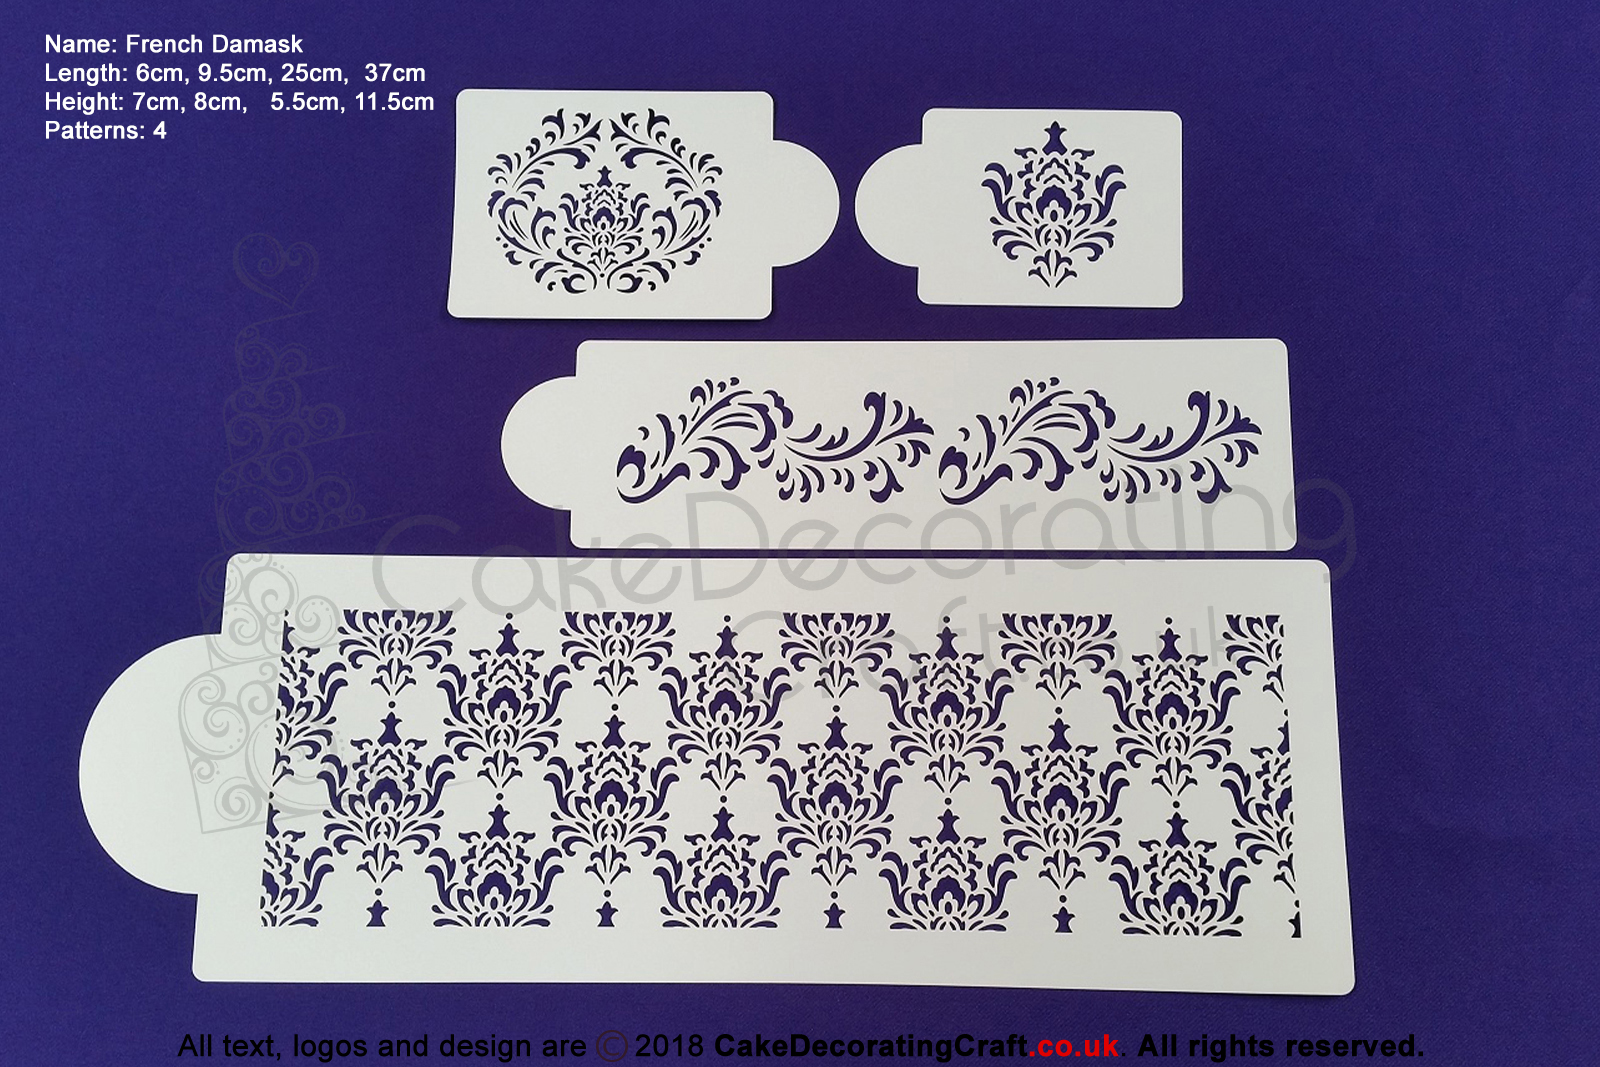 French Damask Stencil | Air Brush Stenciling | Cake and Cupcake Decorating Craft Tool